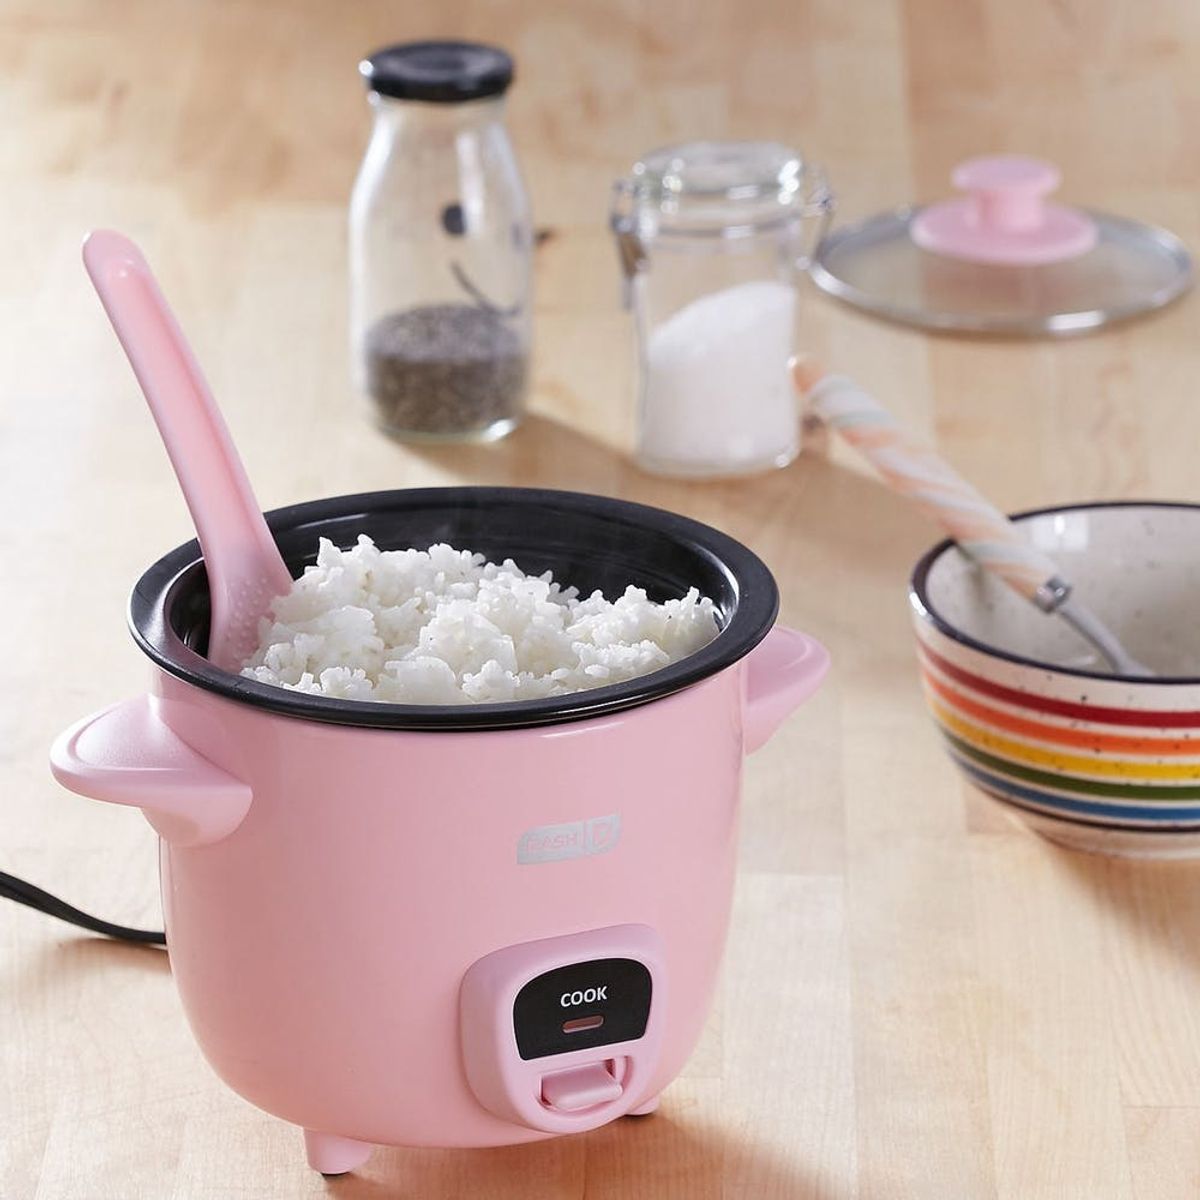 13 Cooking Tools to Bring Millennial Pink into Your Kitchen